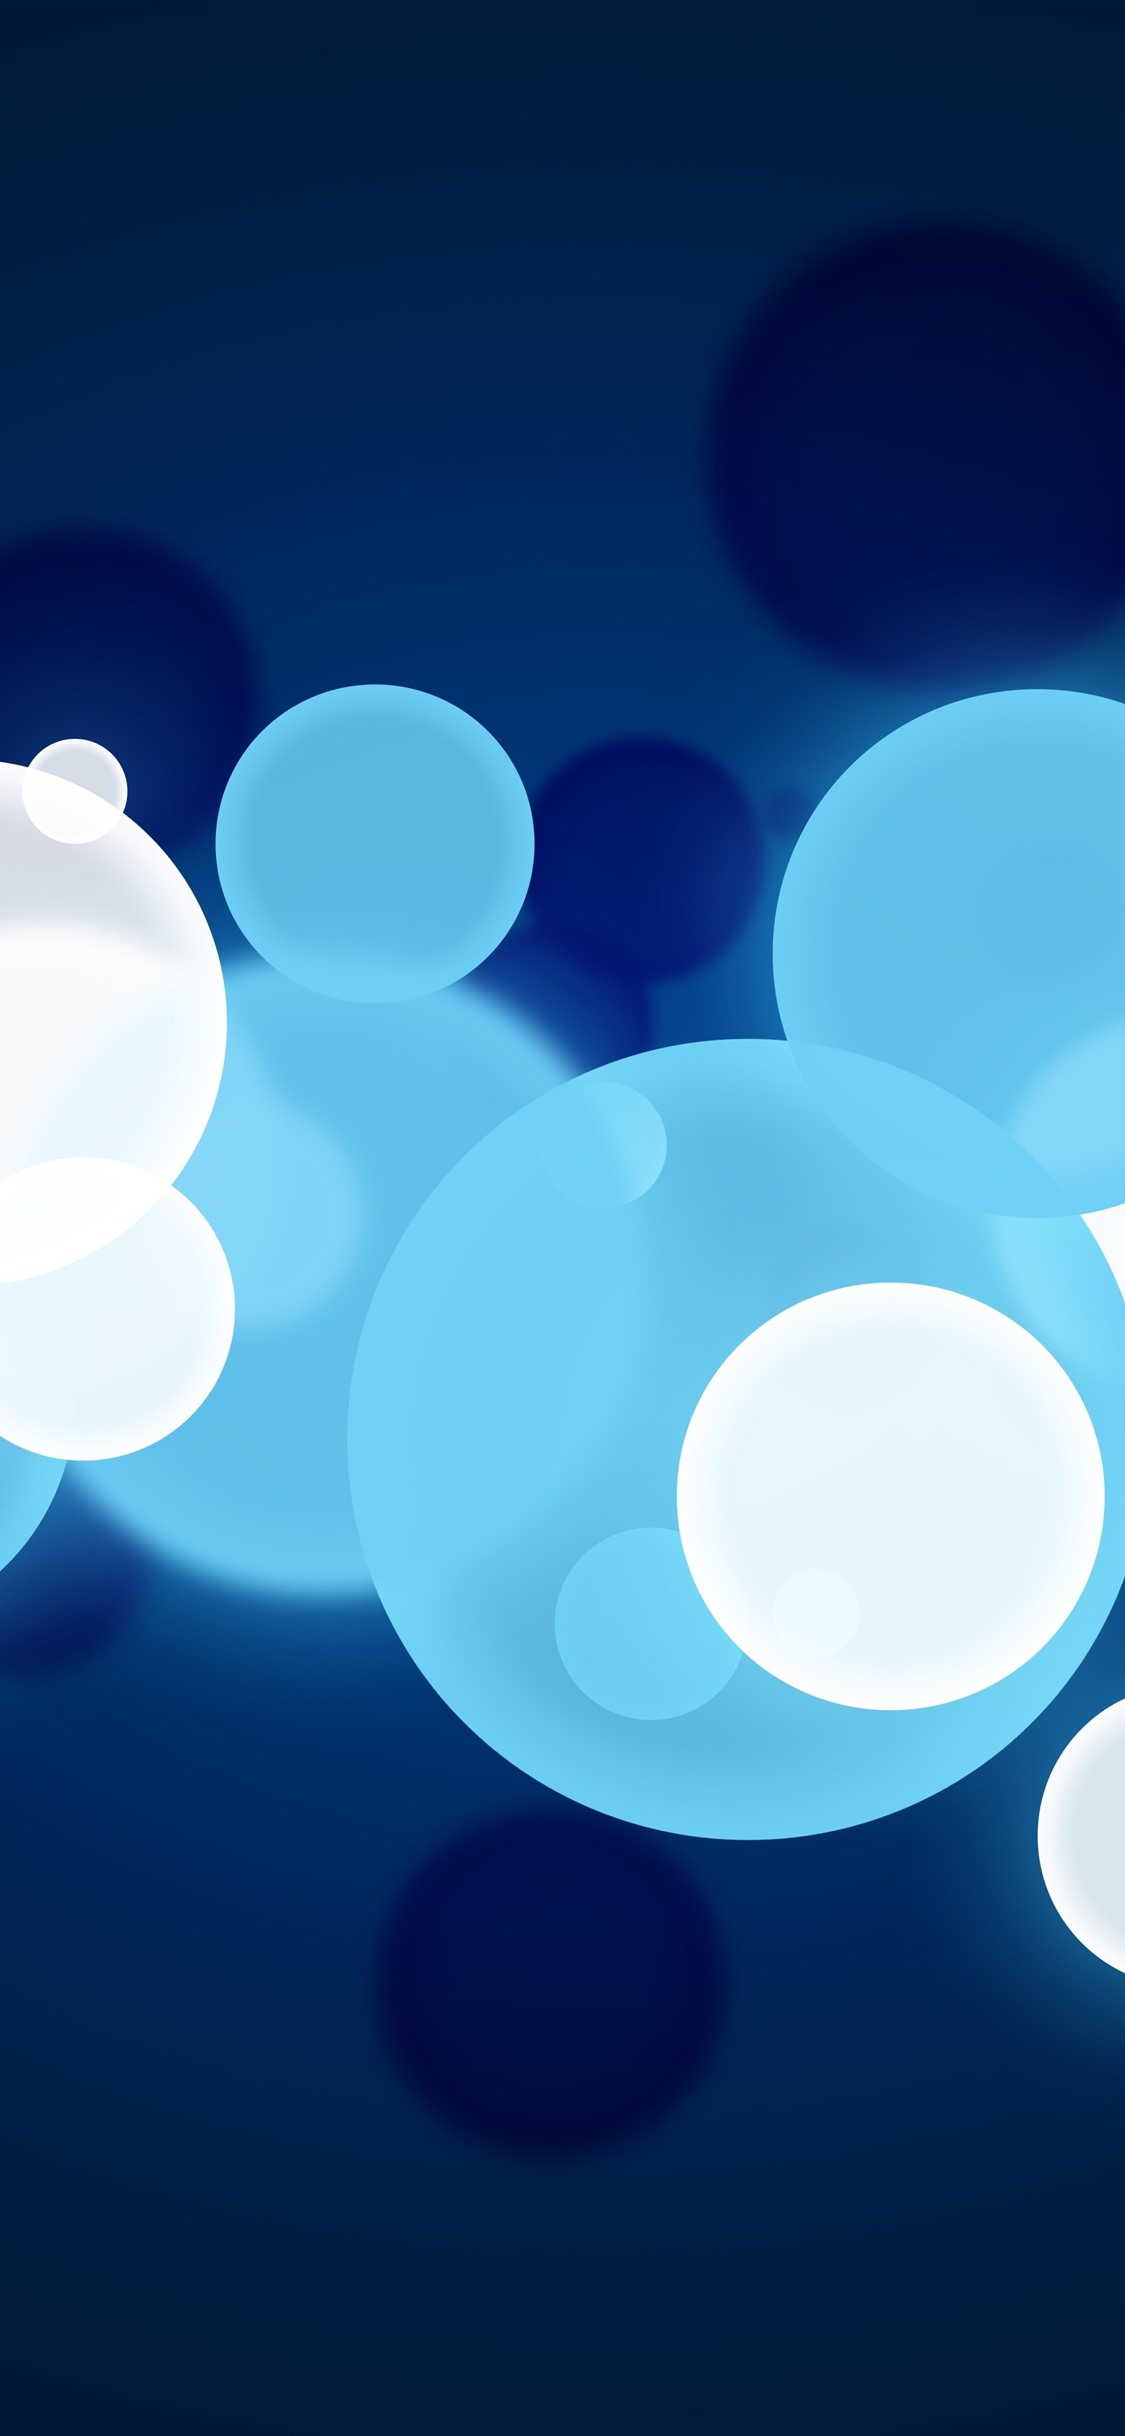 Blue And White Bubbles, Abstract 1242x2688 IPhone 11 Pro XS Max Wallpaper, Background, Picture, Image